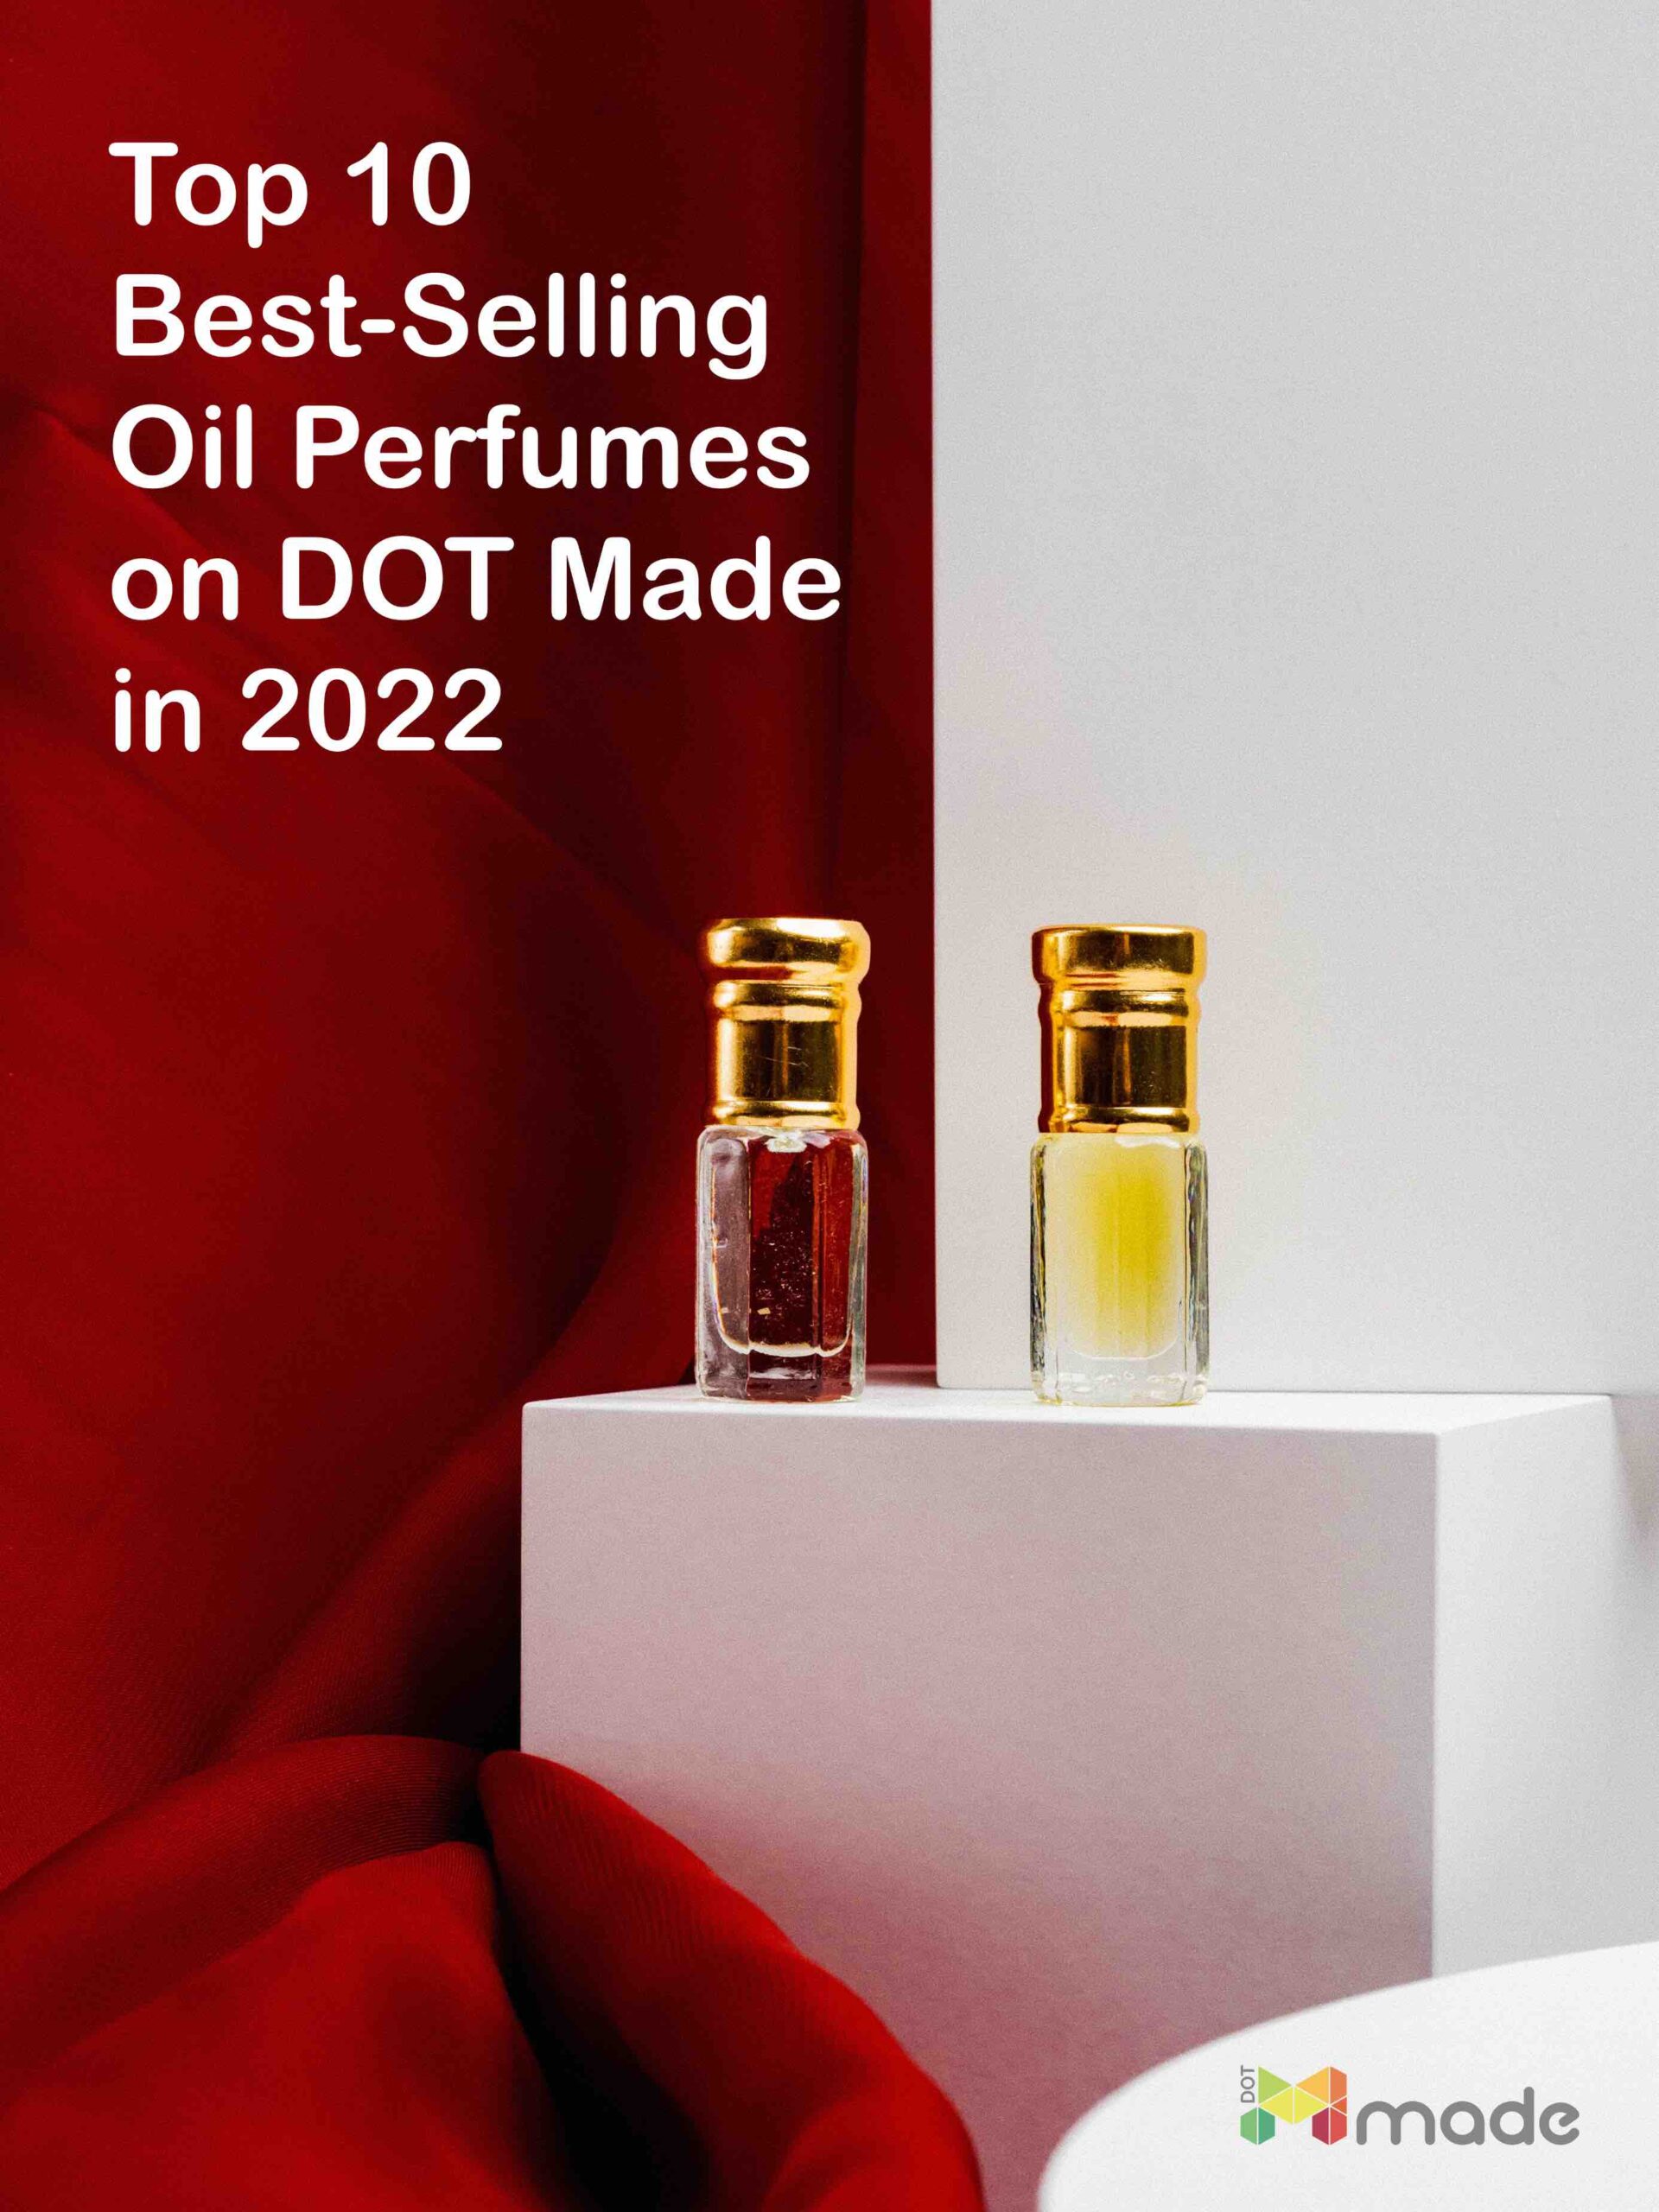 Top 10 Best-Selling Oil Perfumes on DOT Made in 2022